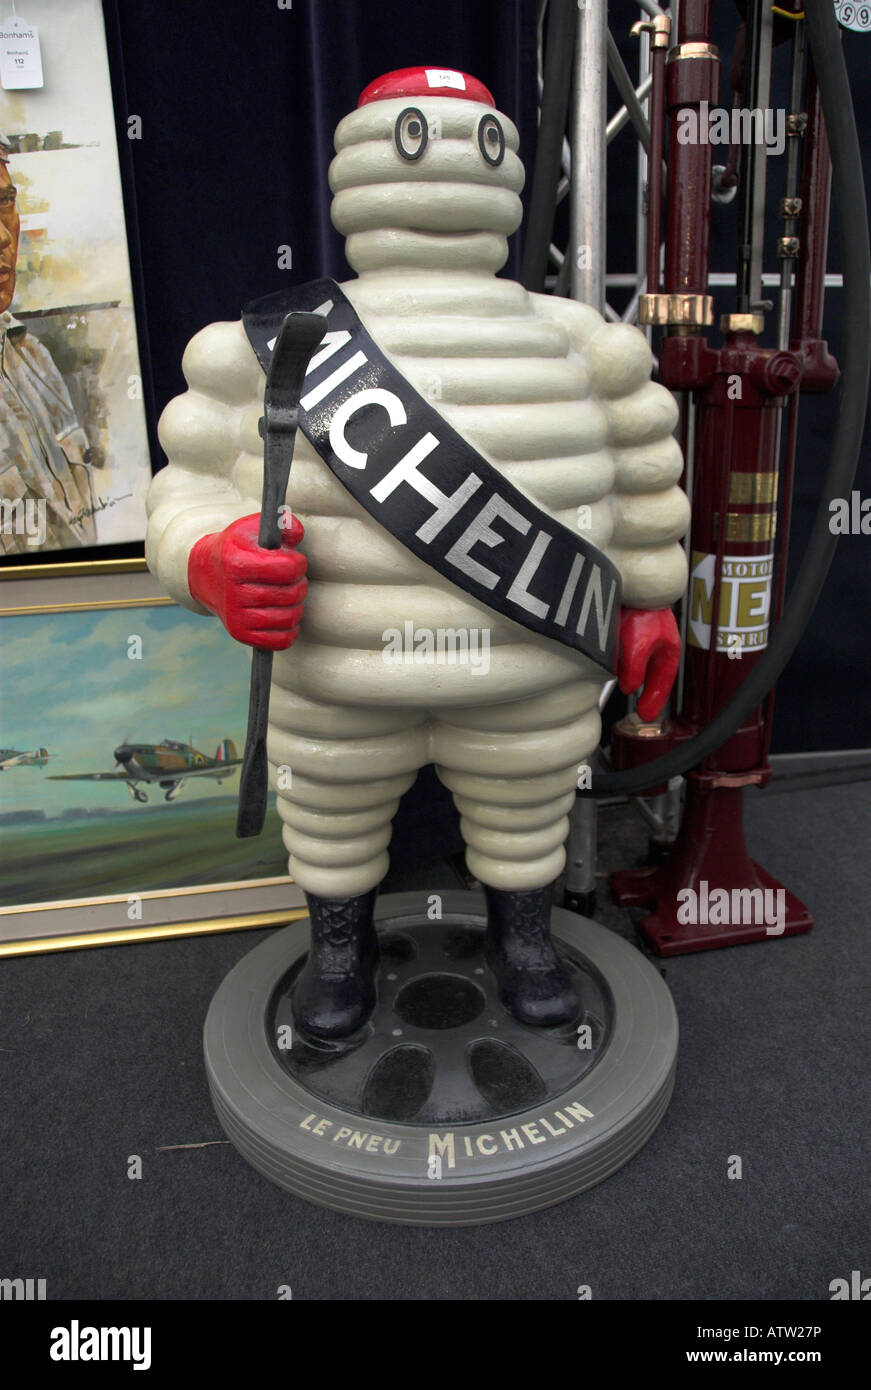 Old Michelin Man Statue For Sale at the Bonlams Auction Stock Photo